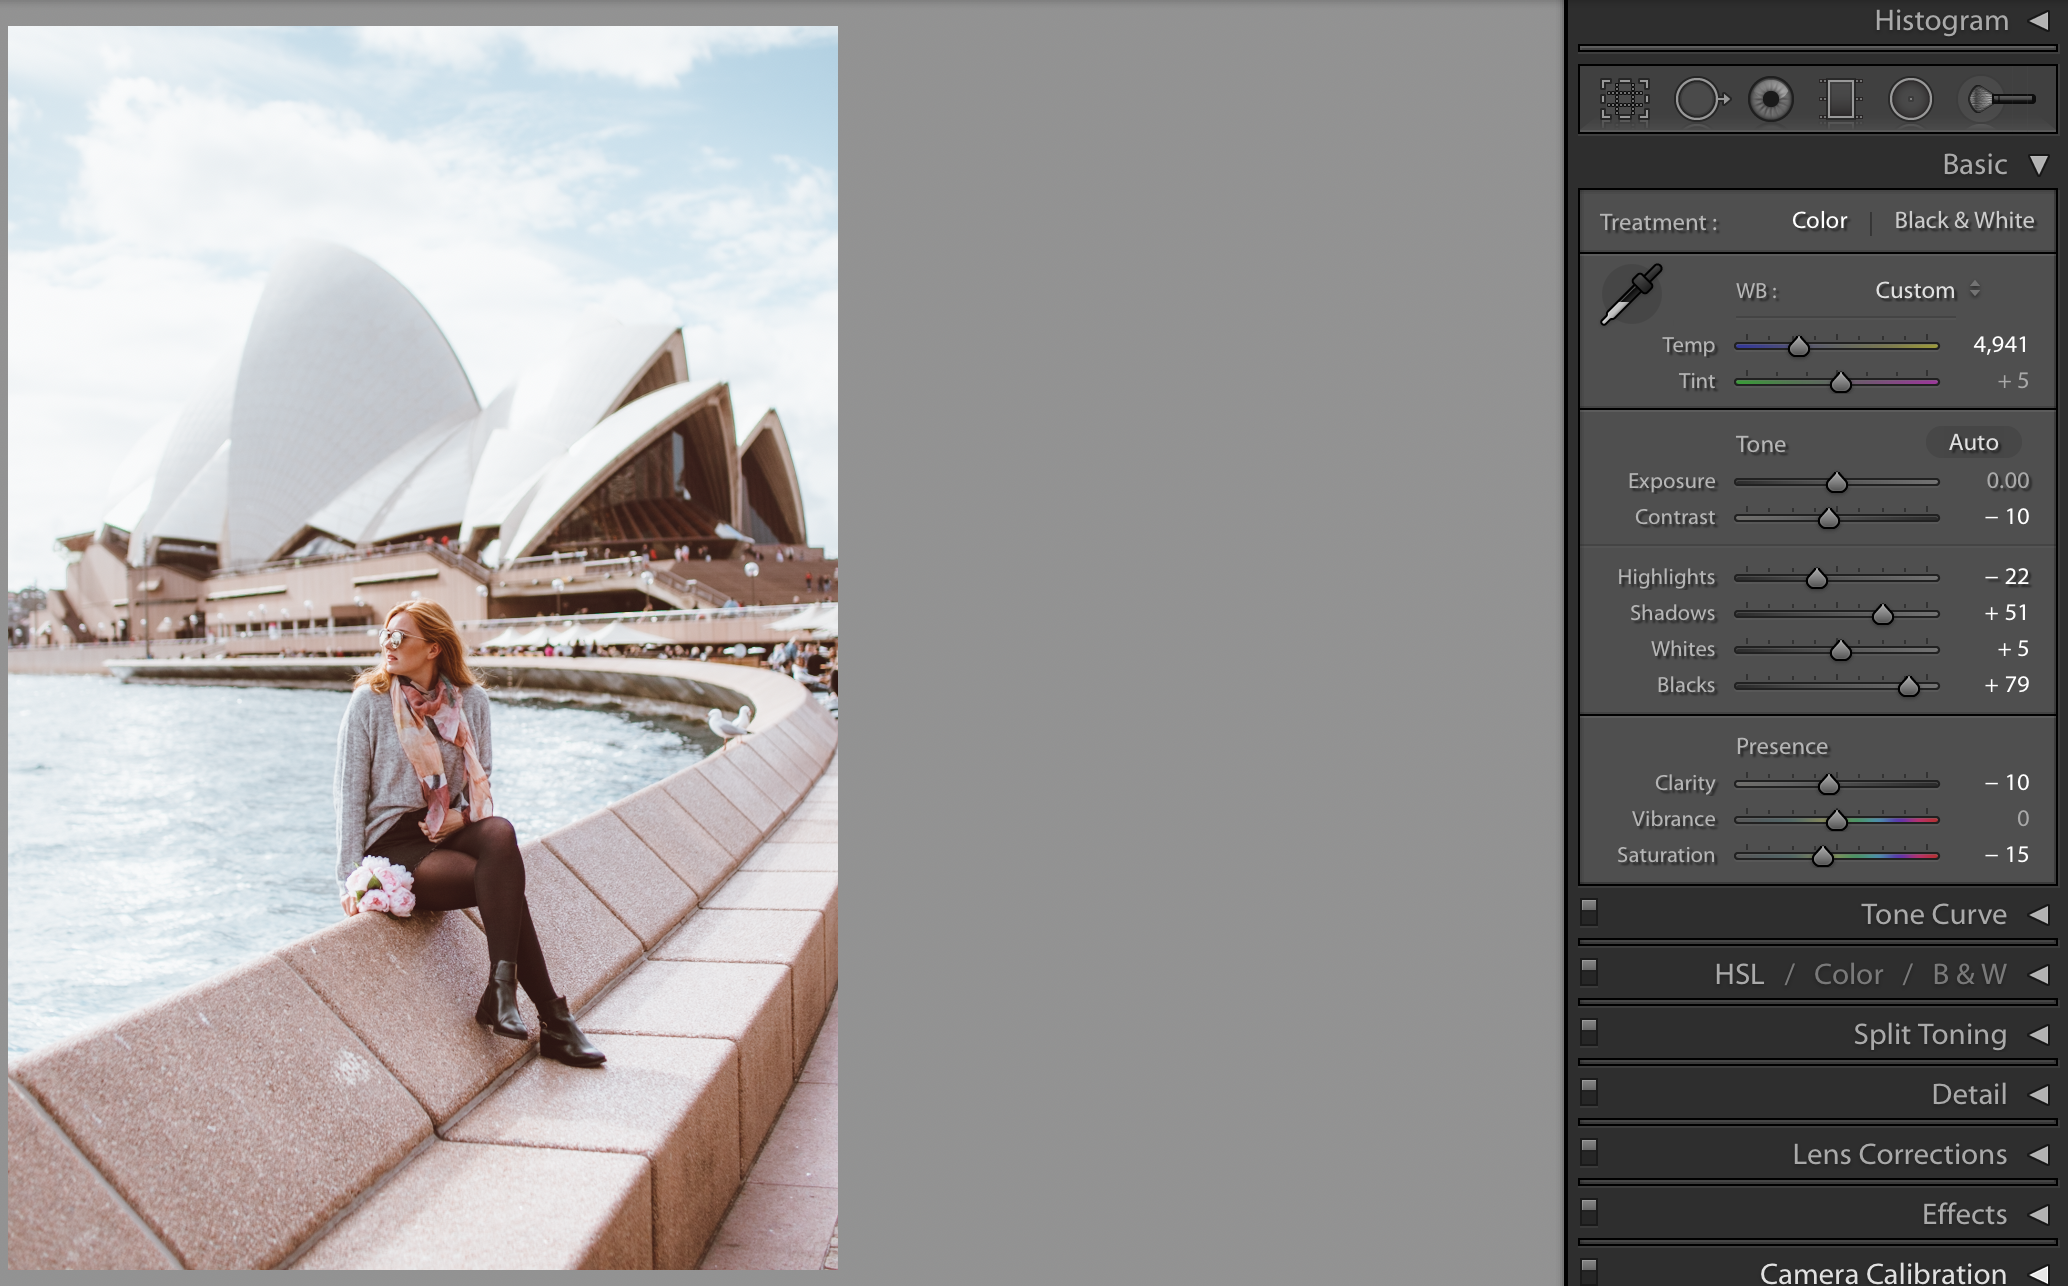 How to Create a Soft Pastel Edit in Lightroom in 3 Easy Steps - The Ginger  Wanderlust